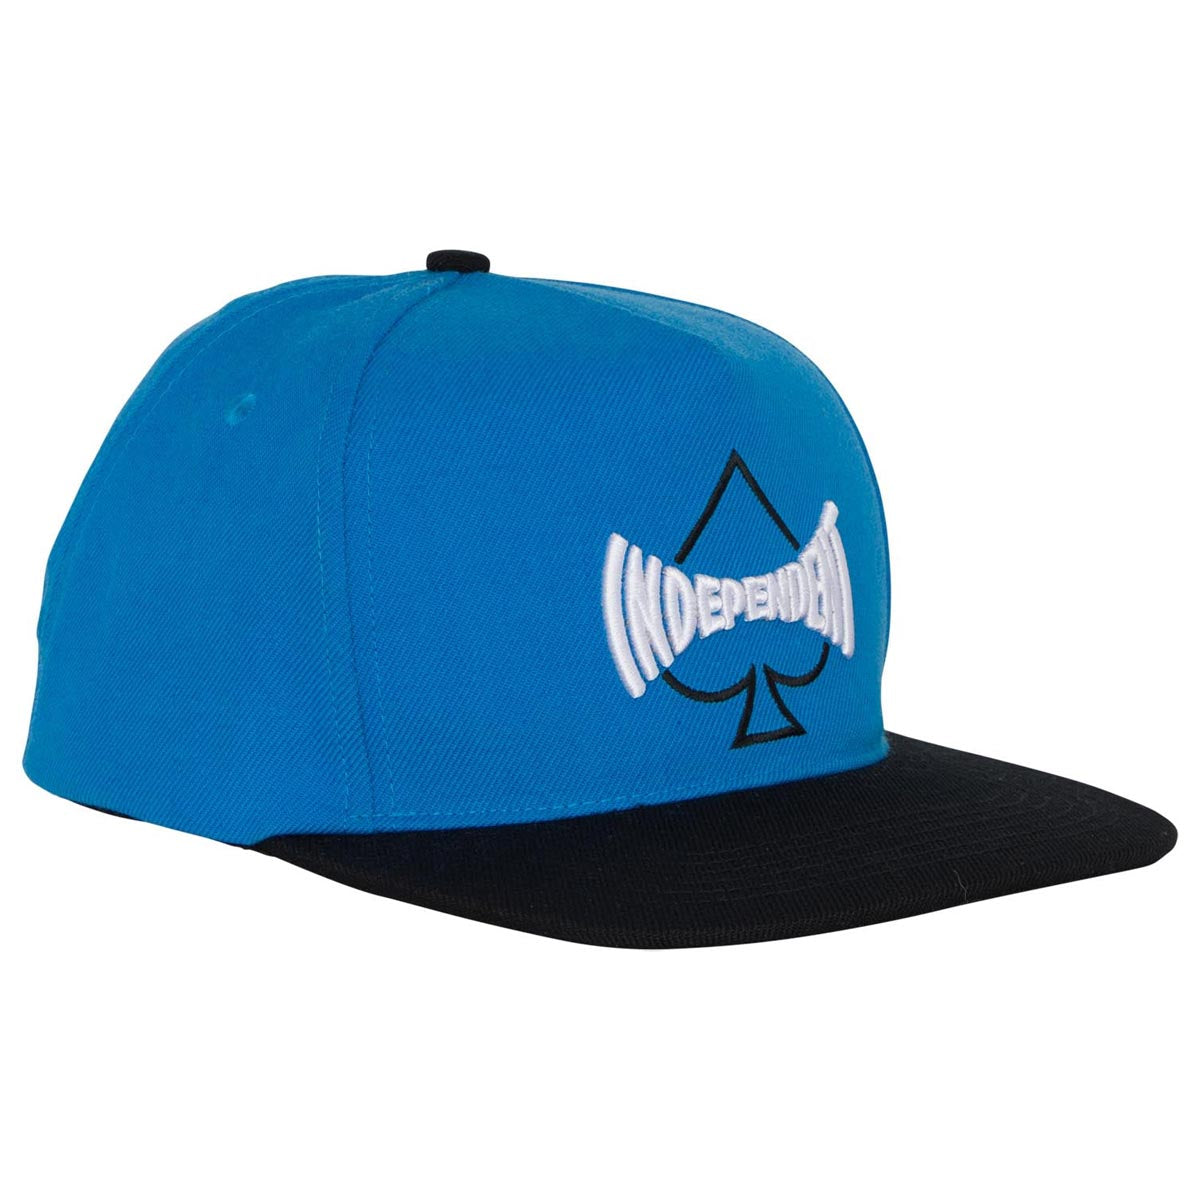 Independent Can't Be Beat Snapback Hat - Blue/Black image 3